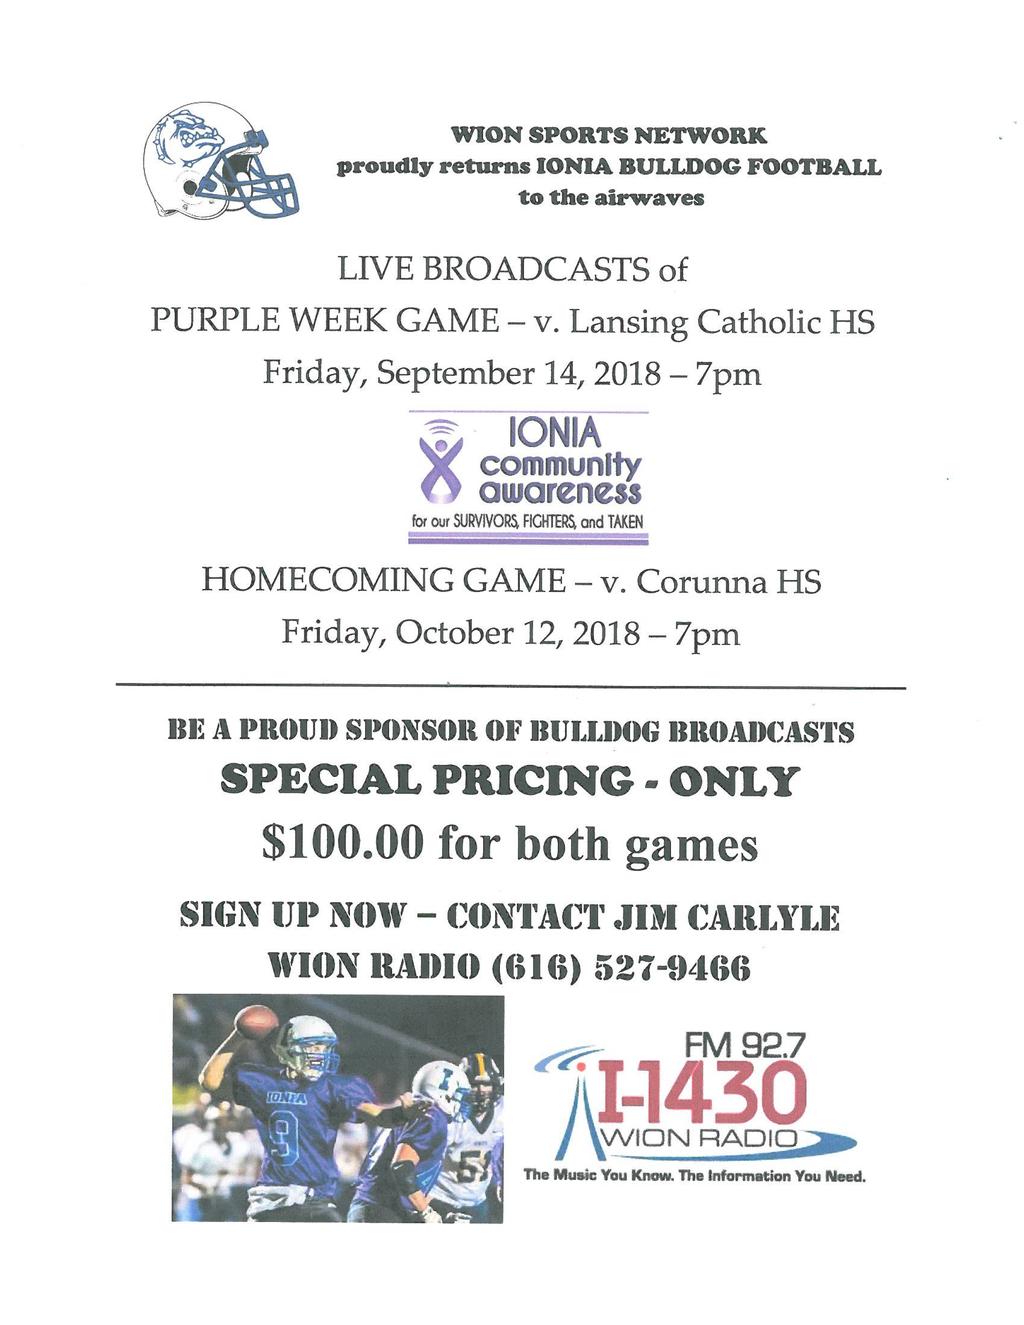 WION Sports Network proudly returns Ionia Bulldog Football to the airwaves! Live broadcast of Purple Game: Ionia Bulldogs VS Lansing Catholic High School Friday, September 14th at 7pm.